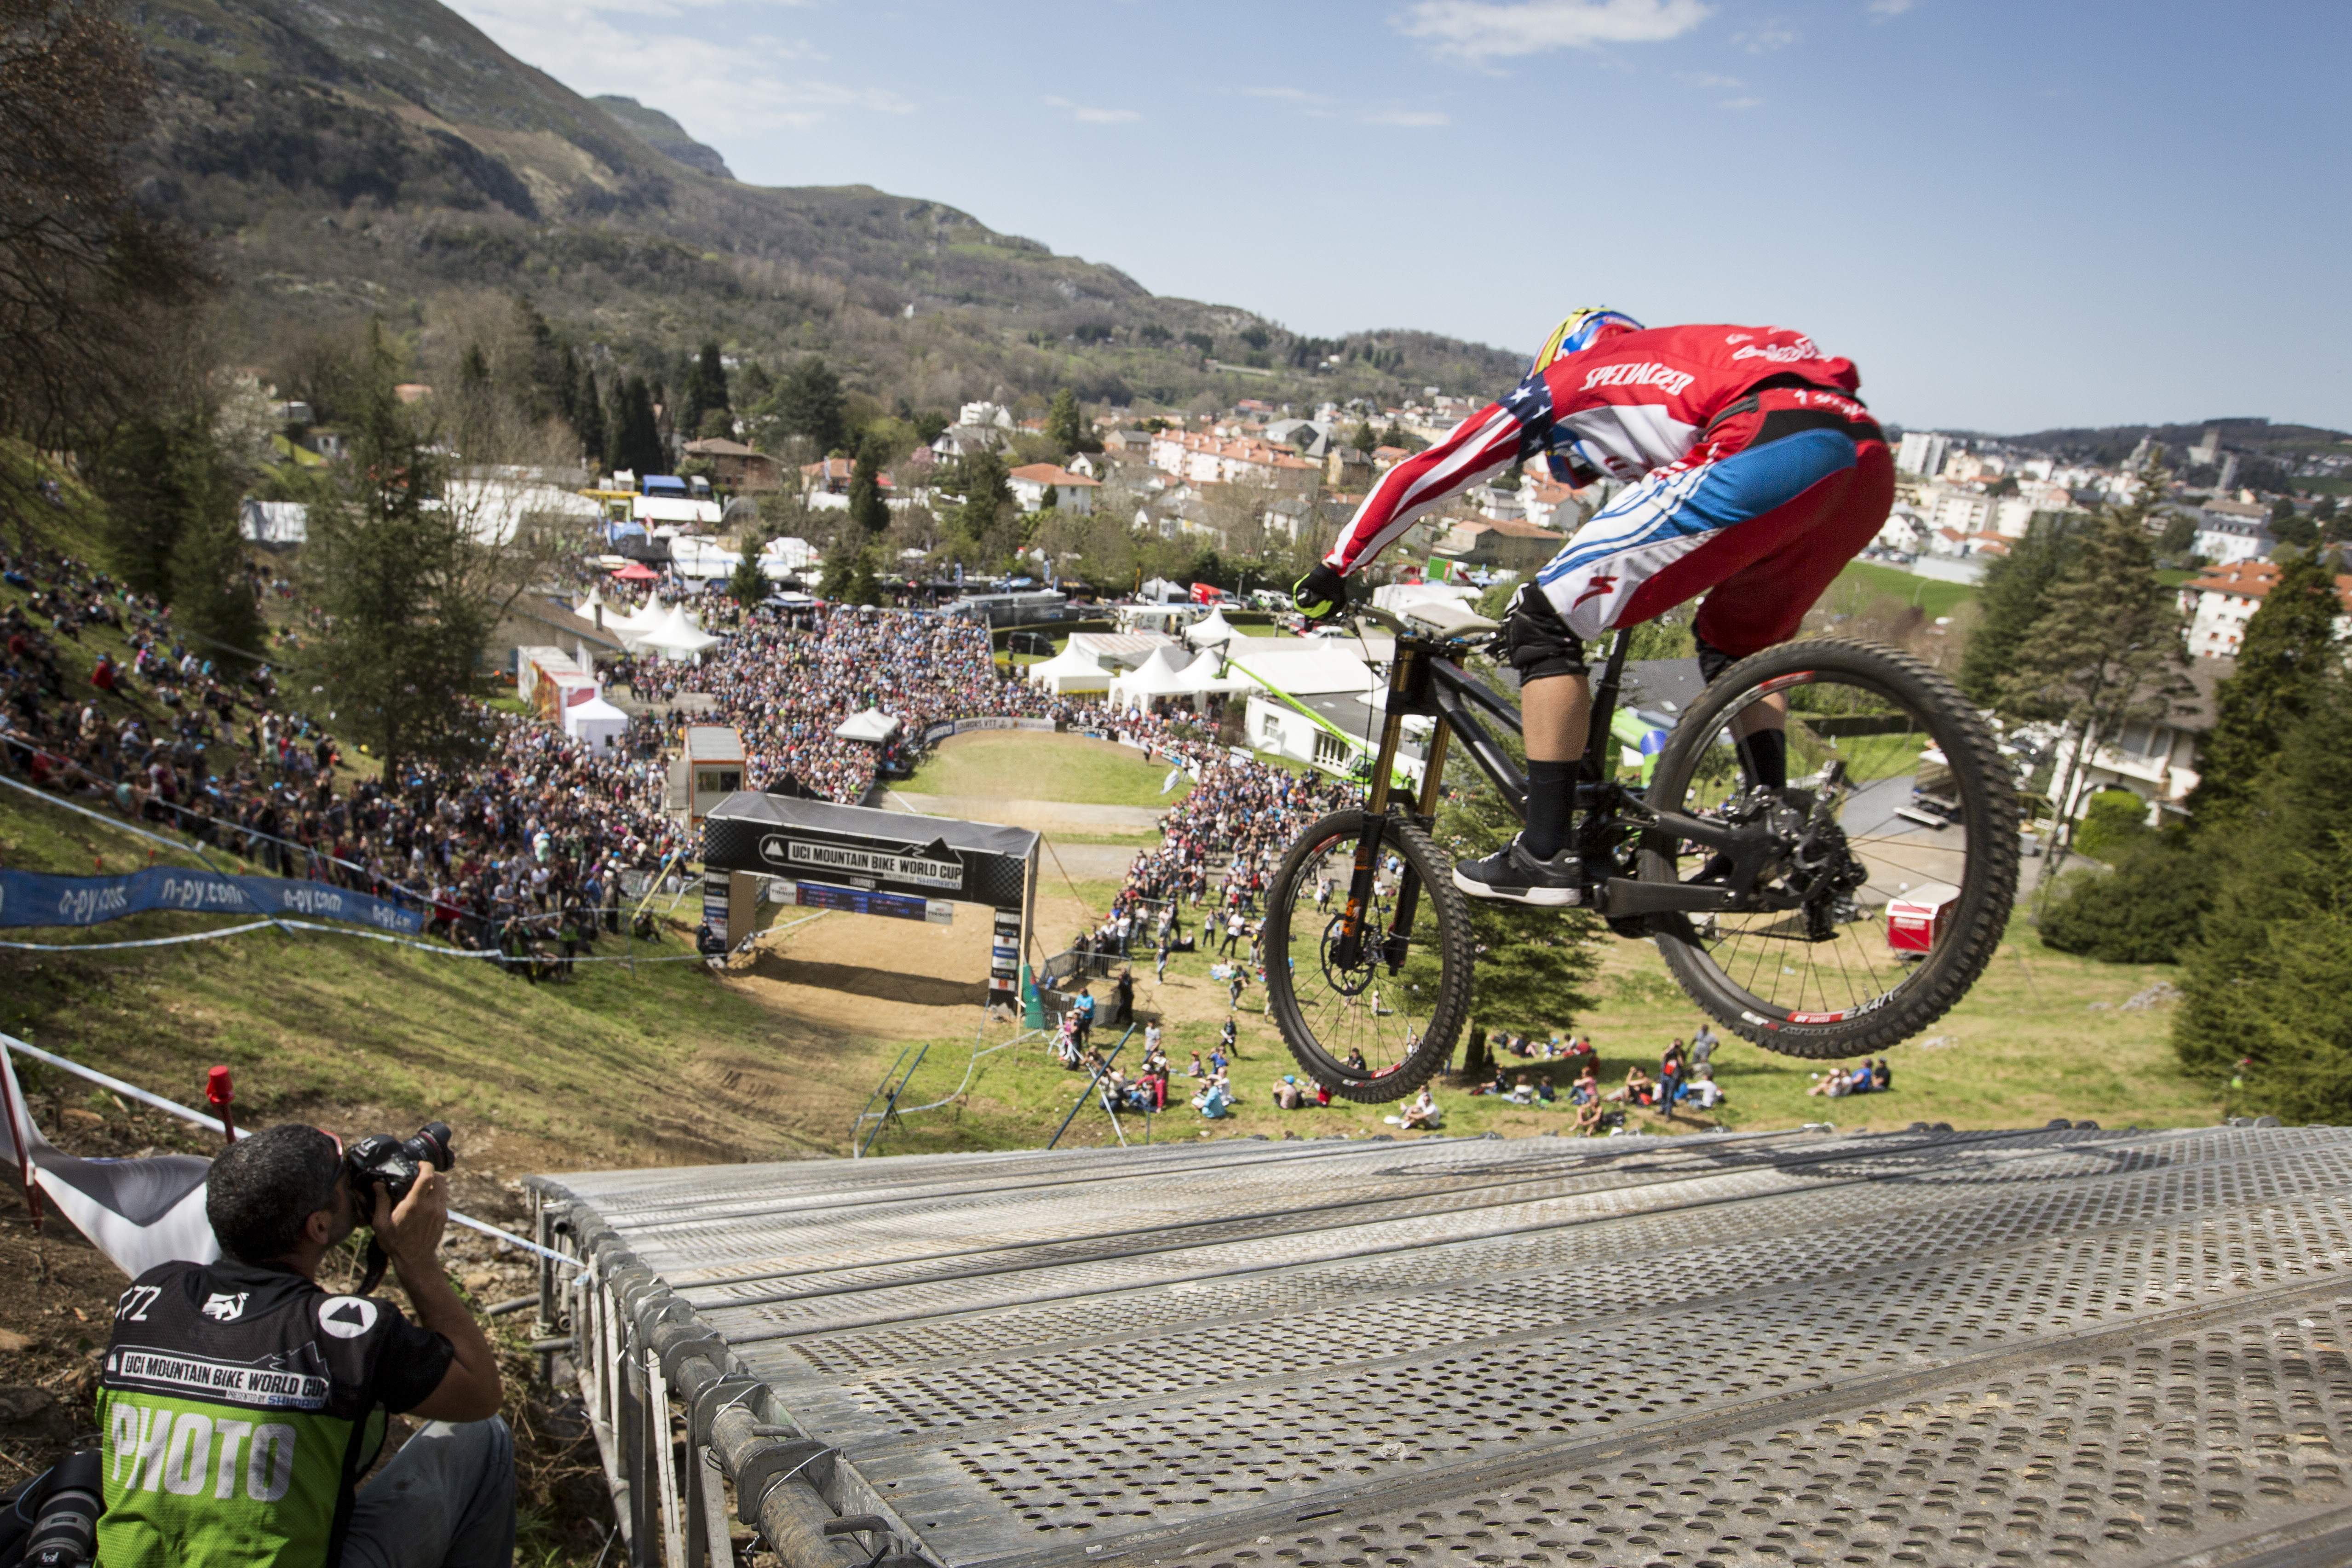 Aaron Gwin performs at the UCI Mountain Bike World Cup in Lourdes, France on April 12th, 2015